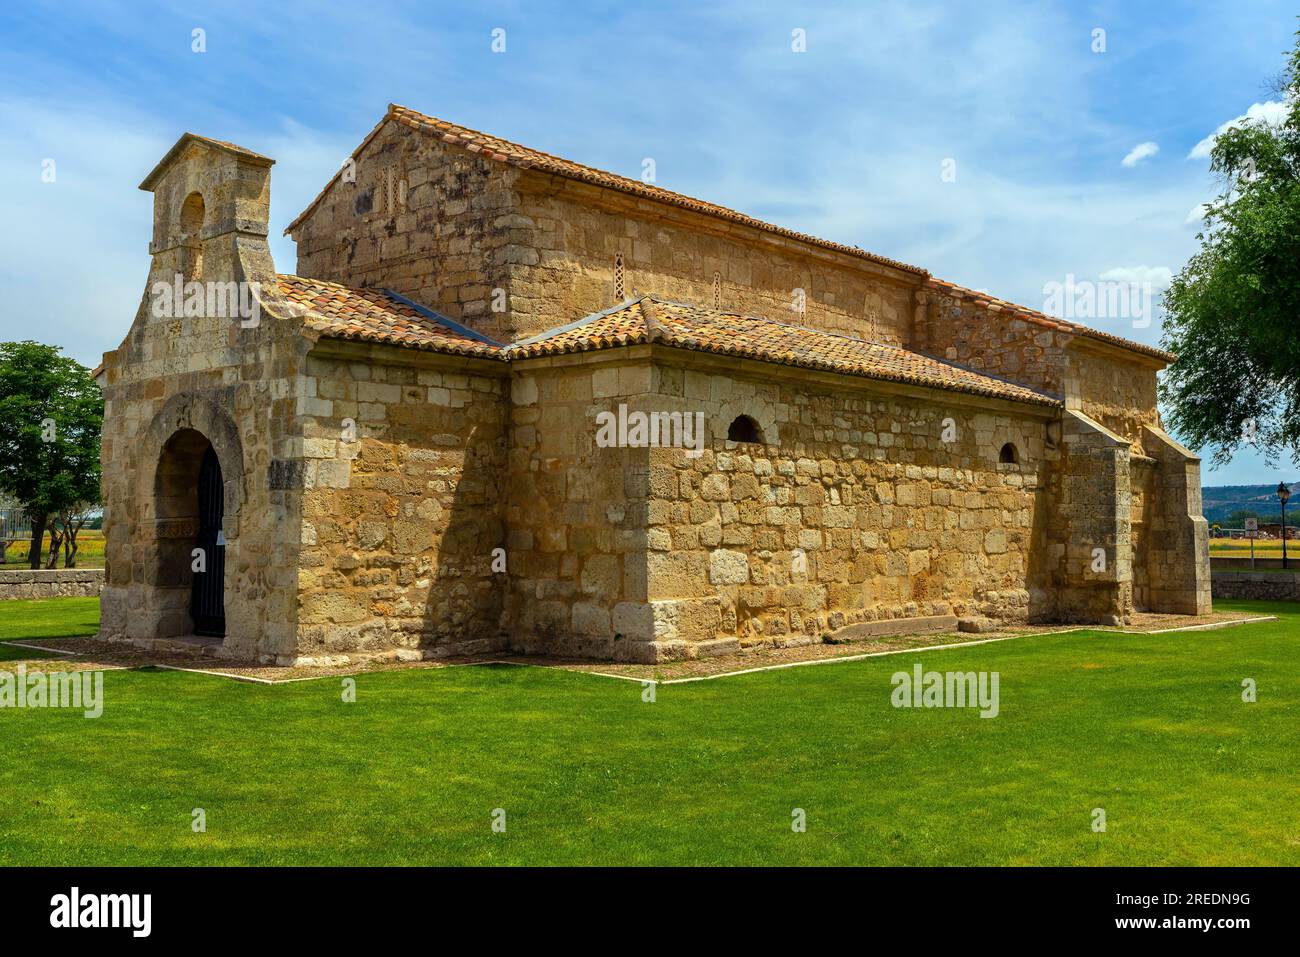 Exterior of Visigothic church of San Juan Bautista, founded in 661 AD. Located in small town Venta de Baños in the Cerrato district. Province of Palen Stock Photo